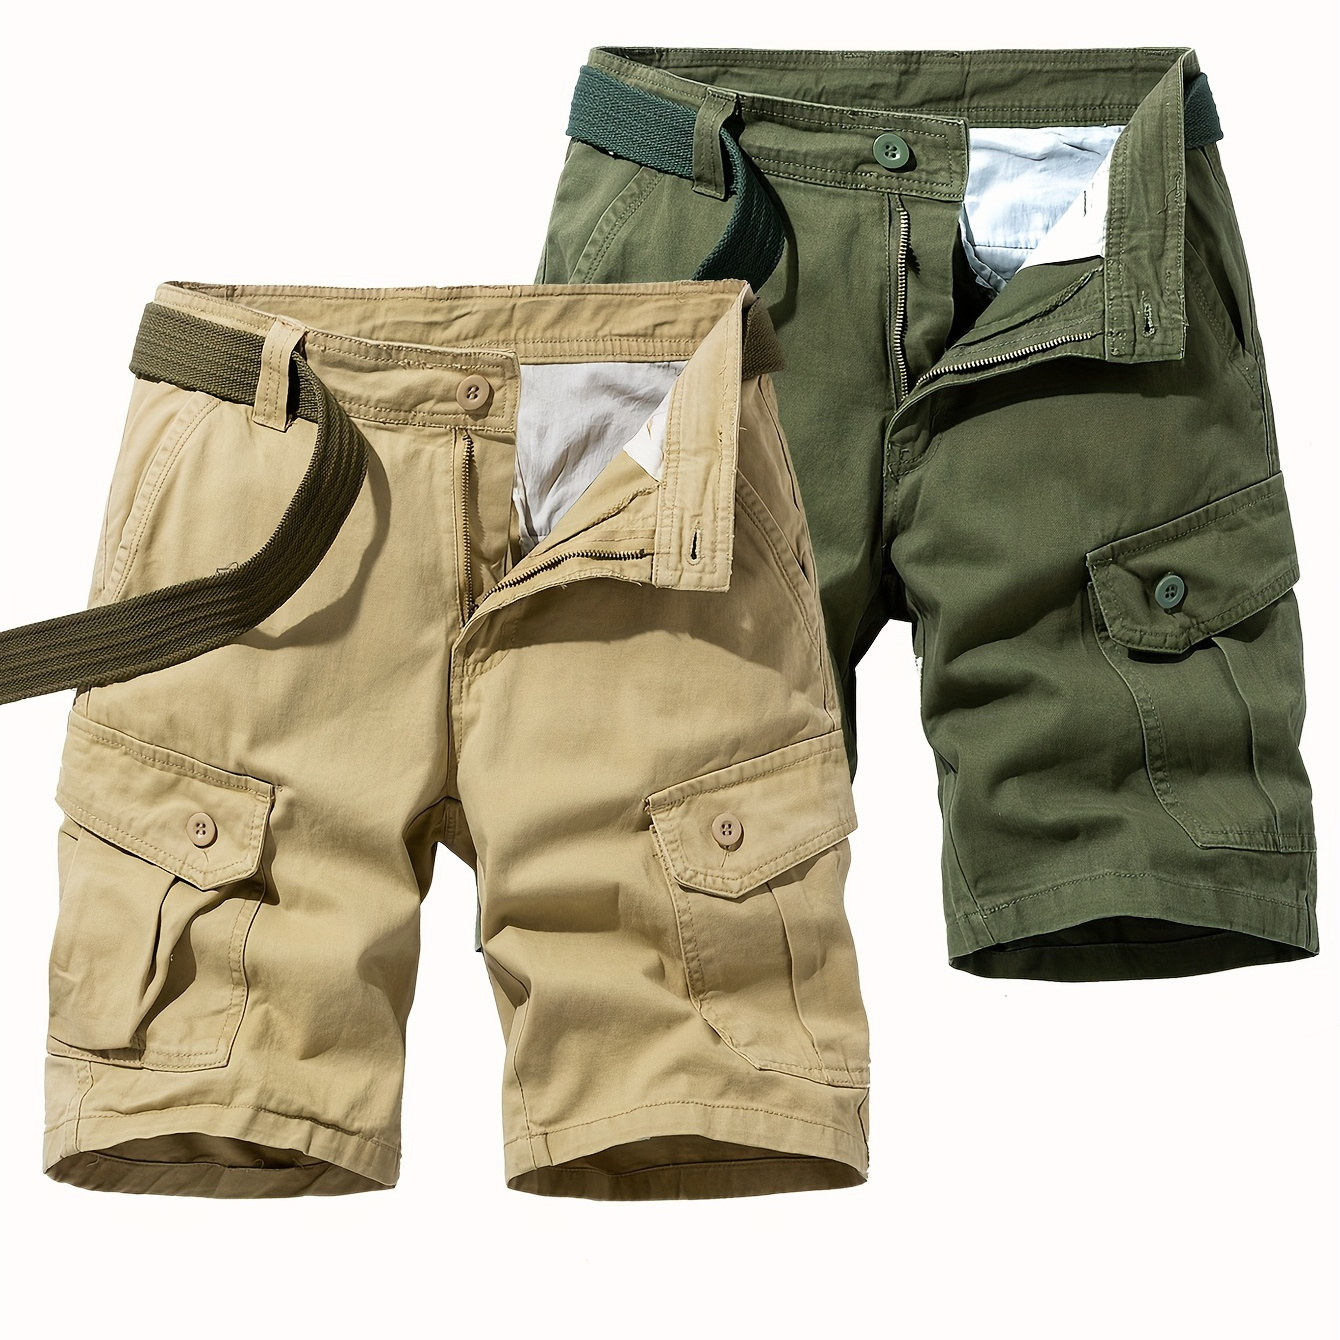 

2 Pcs Men's 100% Cotton Solid Cargo Shorts With Multi Pockets, Casual Shorts For Summer